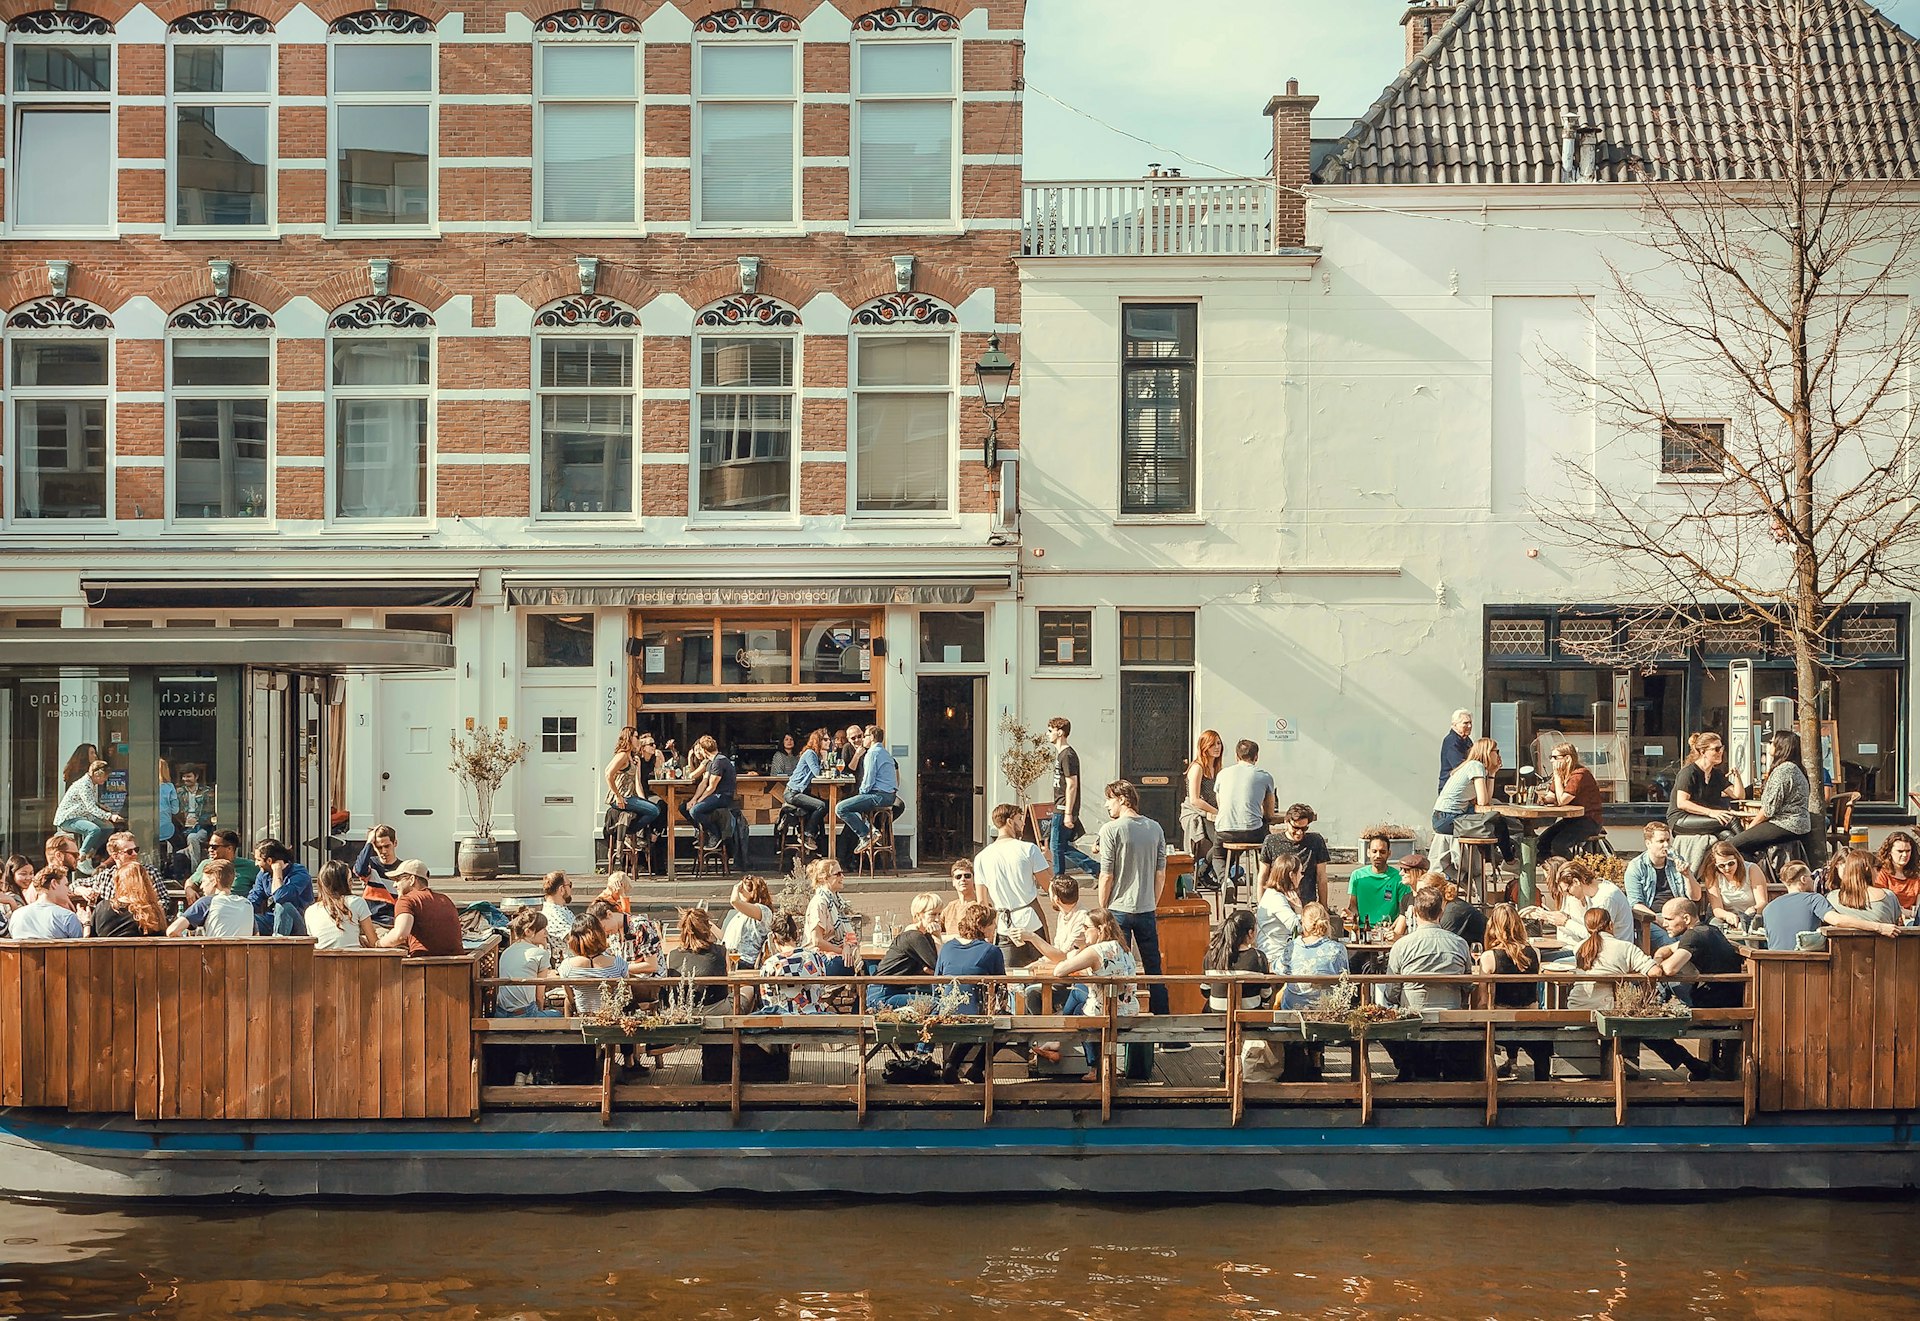 Features - Many people eating and talking on riverboat cafe on the canal in a sunny day